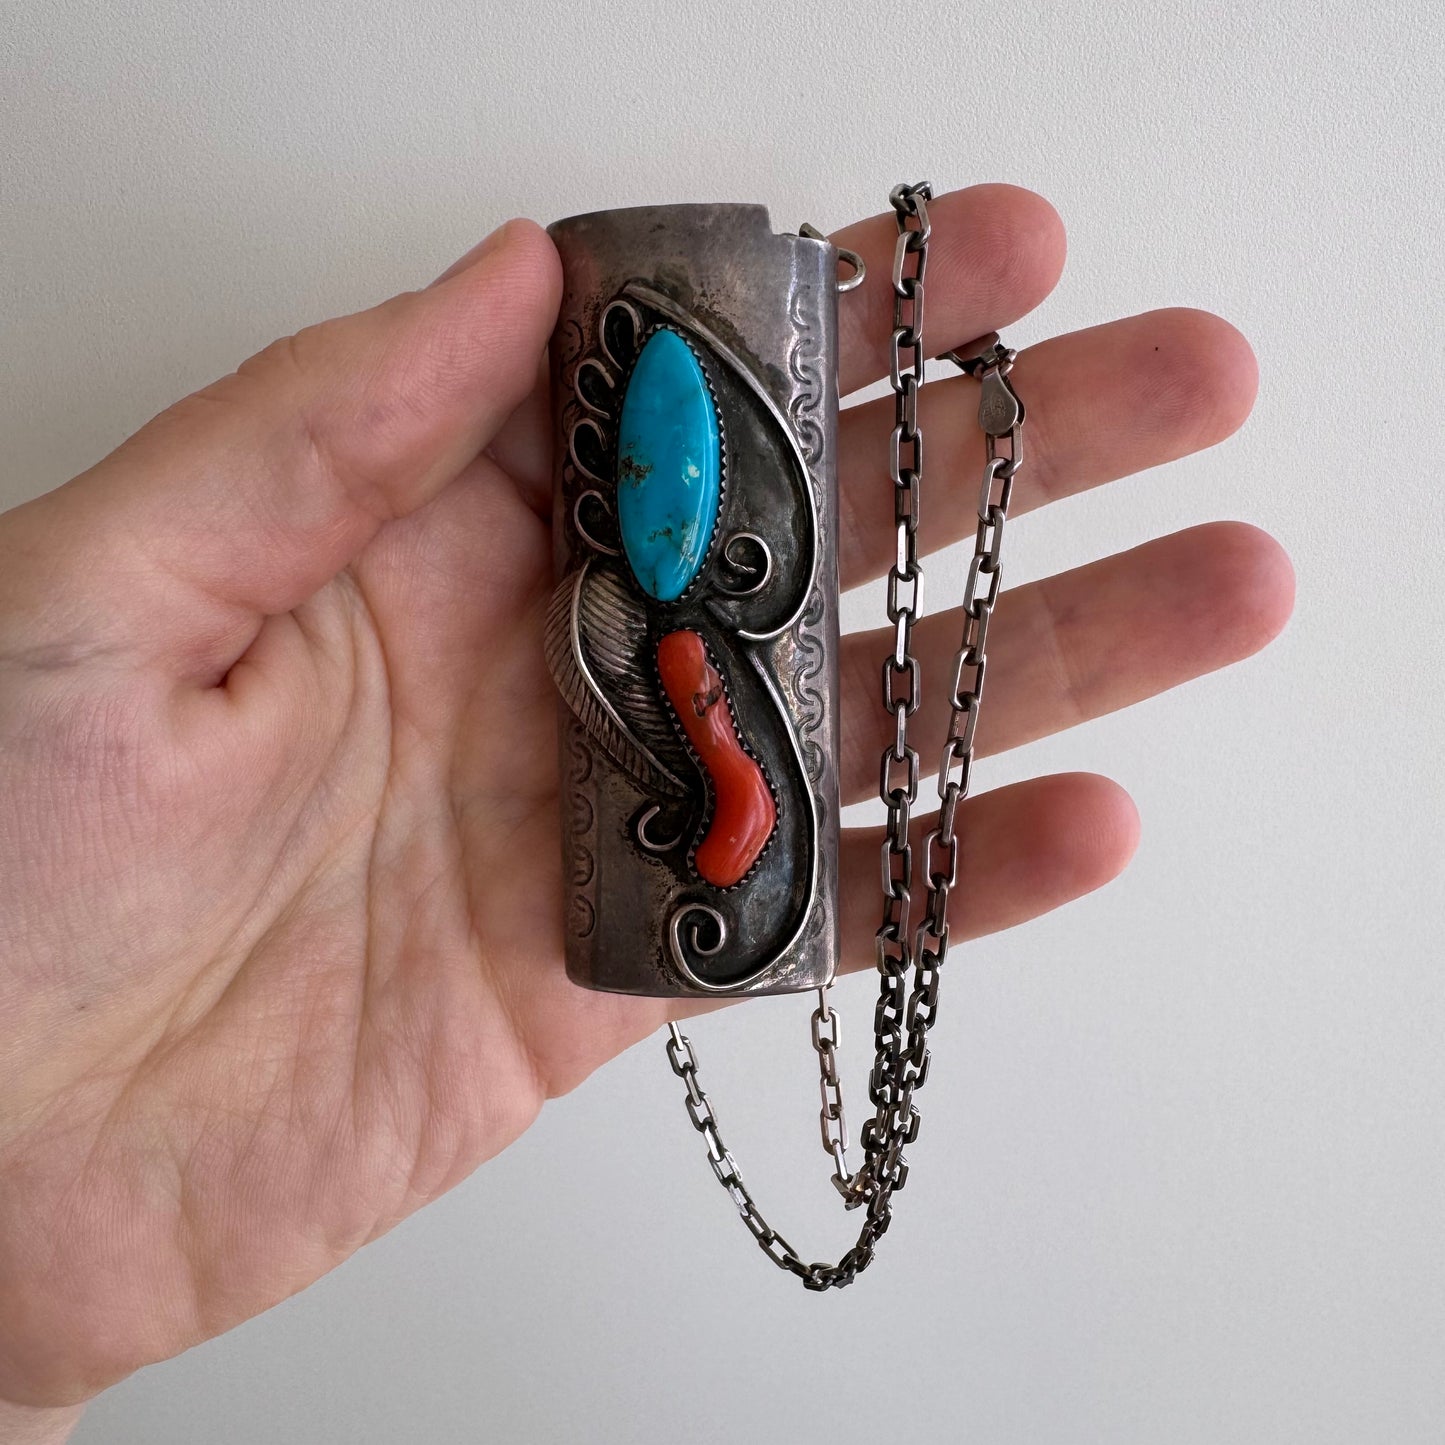 reimagined V I N T A G E // wearable lighter case / sterling silver bic lighter case pendant necklace with turquoise and coral / 23.25", 37g